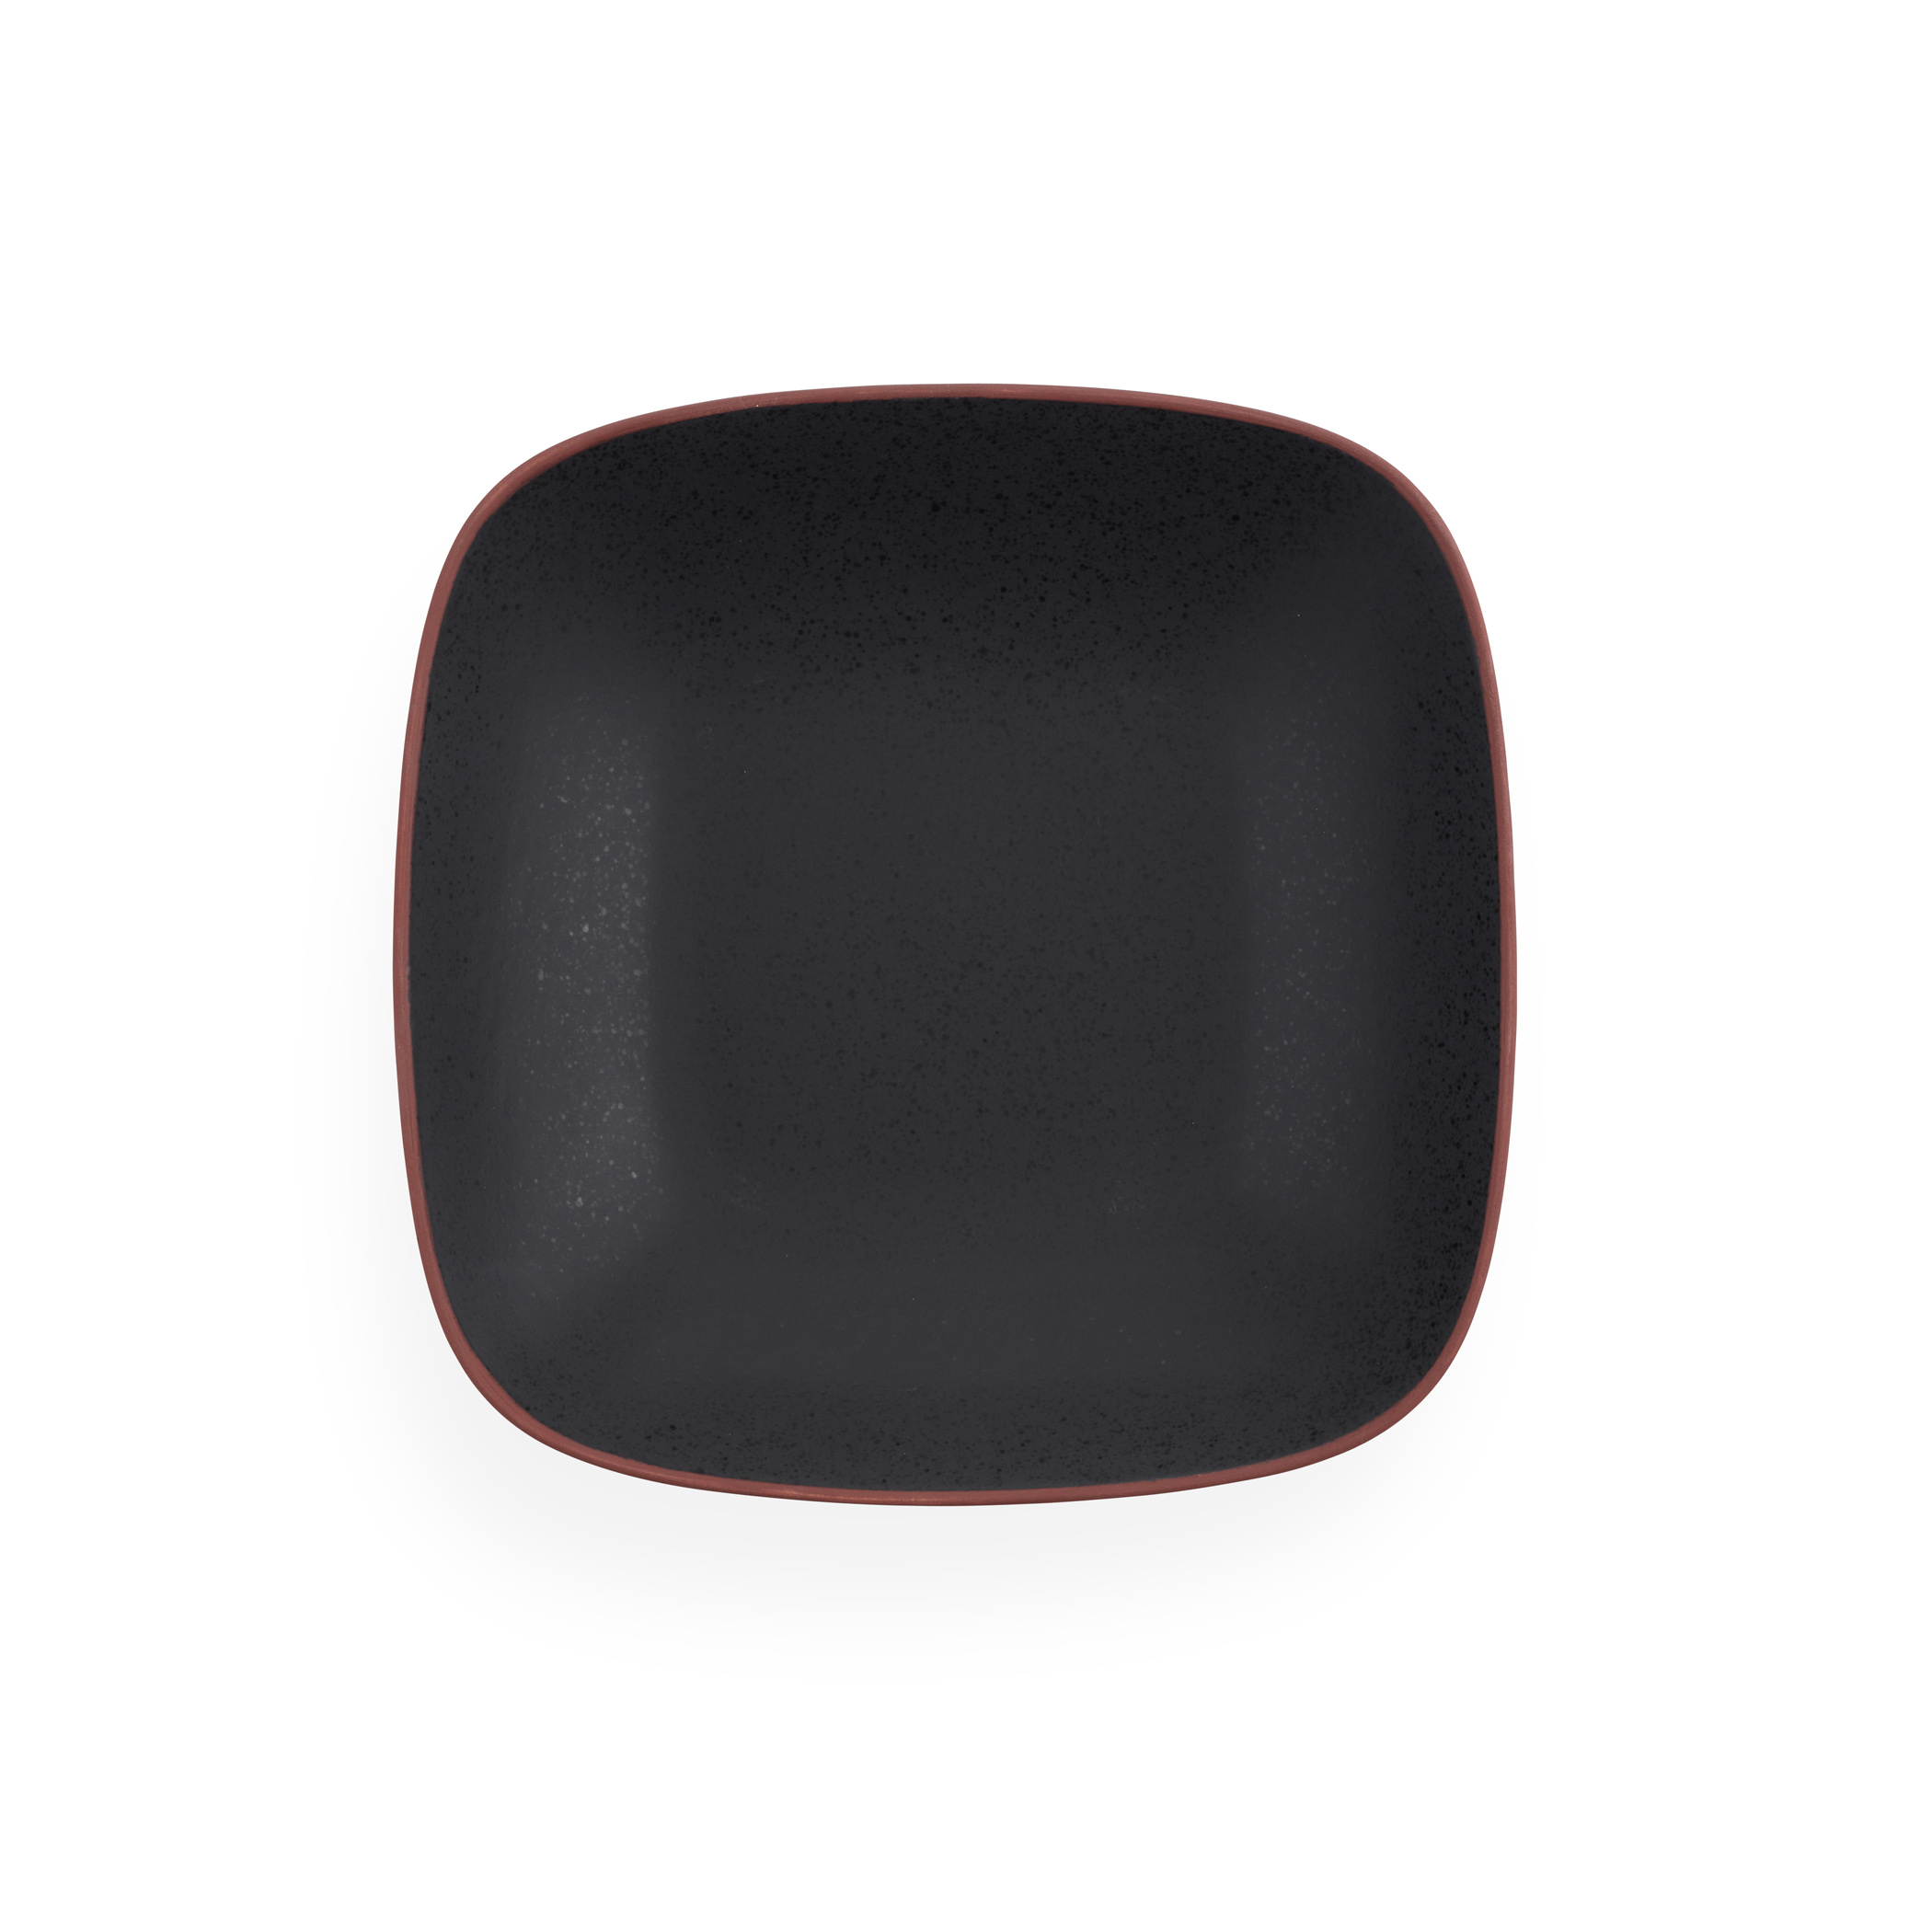 Taos Soft Square Serving Bowl - Onyx image number null